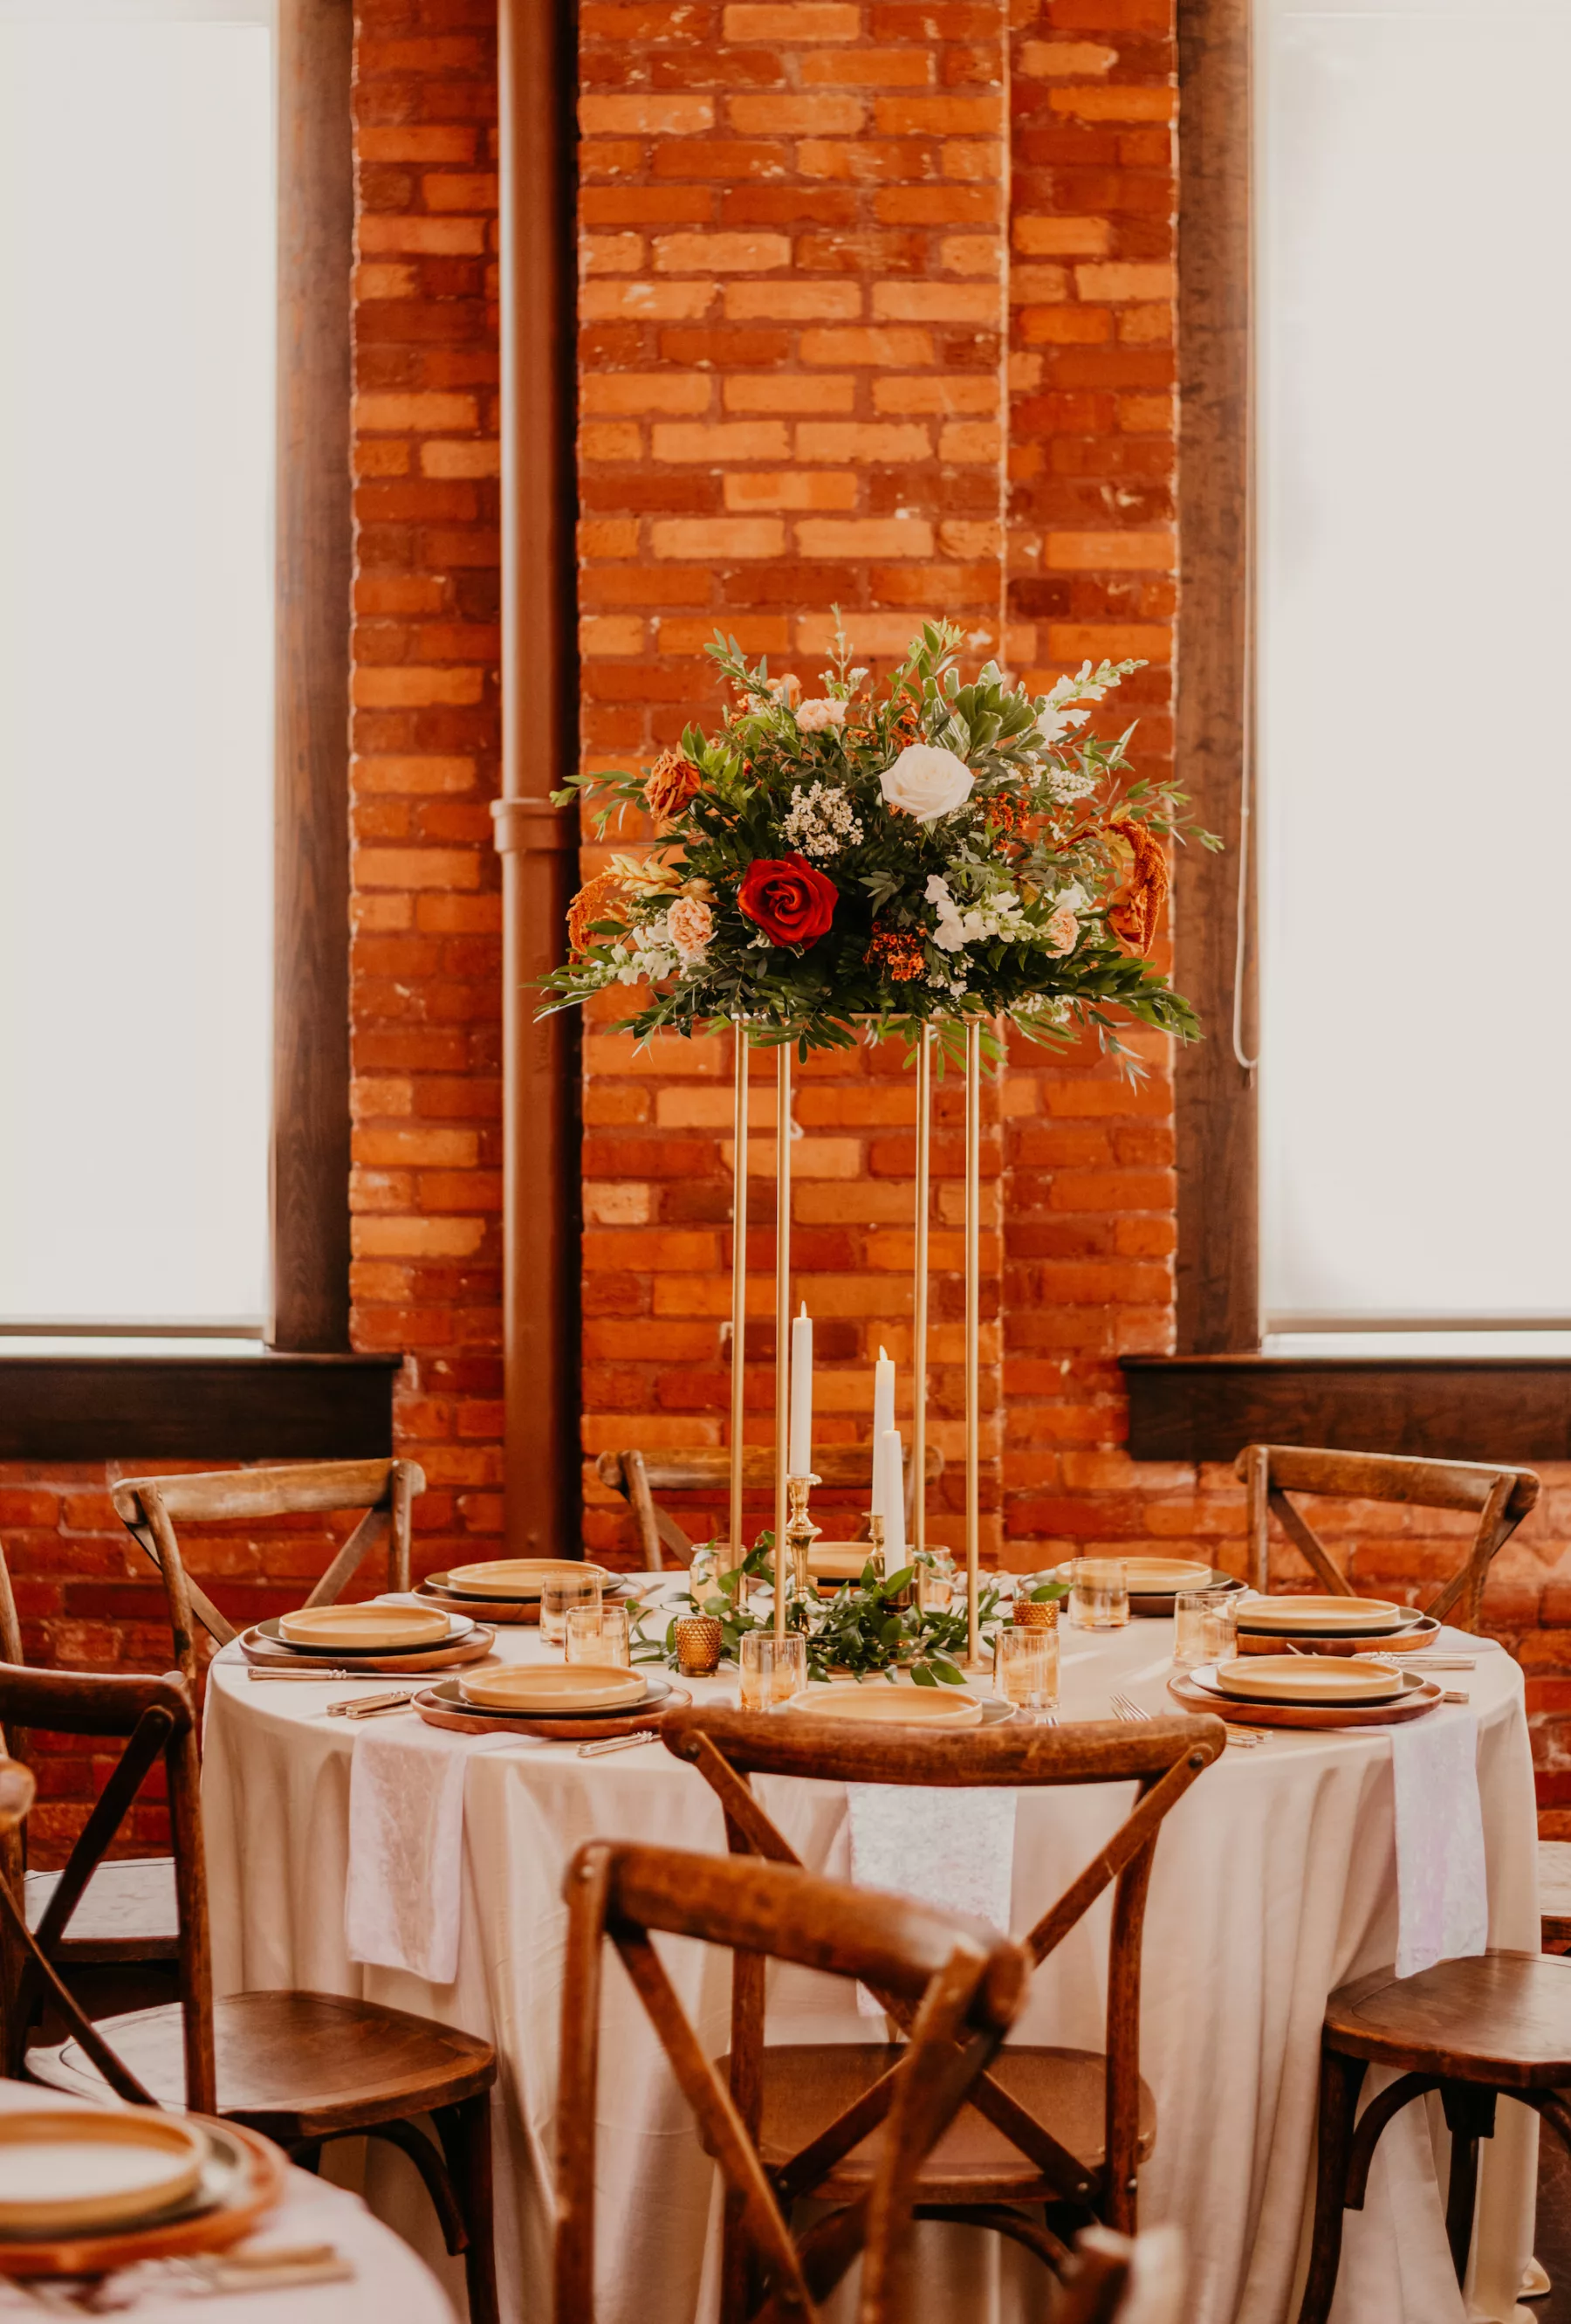 Boho Industrial Wedding Reception Decor Inspiration | Gold Flower Stands with White Roses, Terracotta Amaranthus, and Greenery | Wooden Crossback Chairs | Kate Ryan Event Rentals |